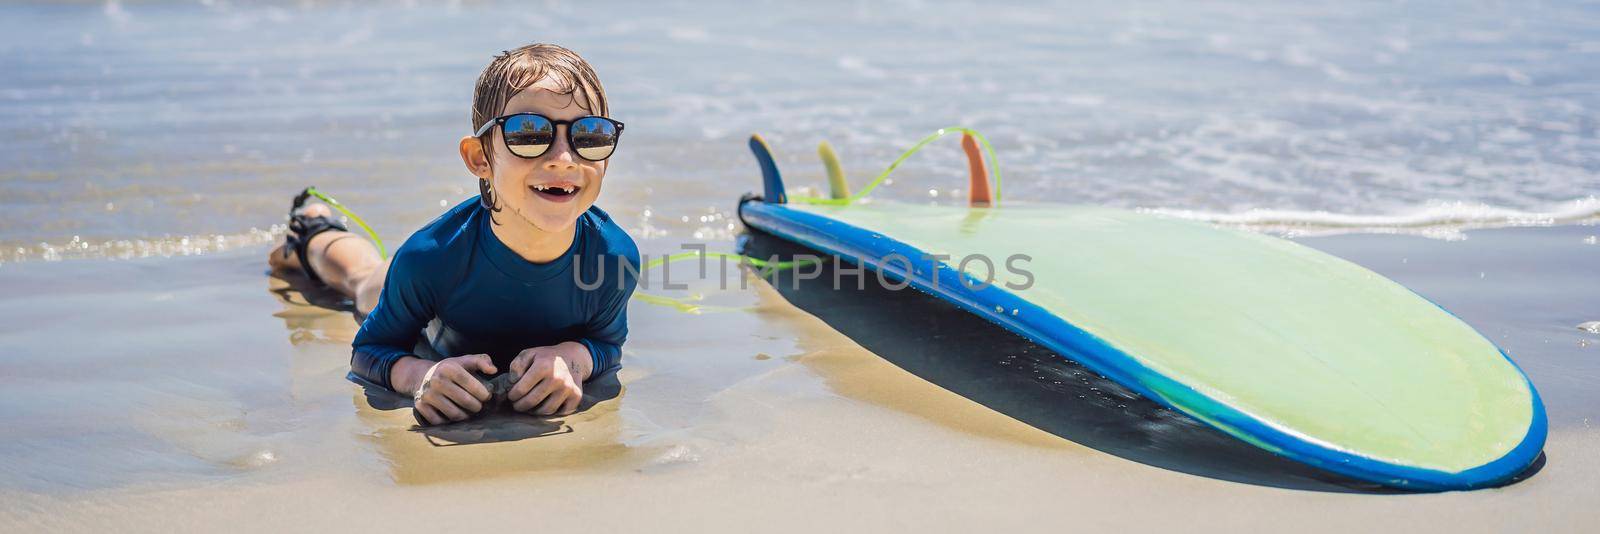 Young surfer, happy young boy at the beach with surfboard. BANNER, LONG FORMAT